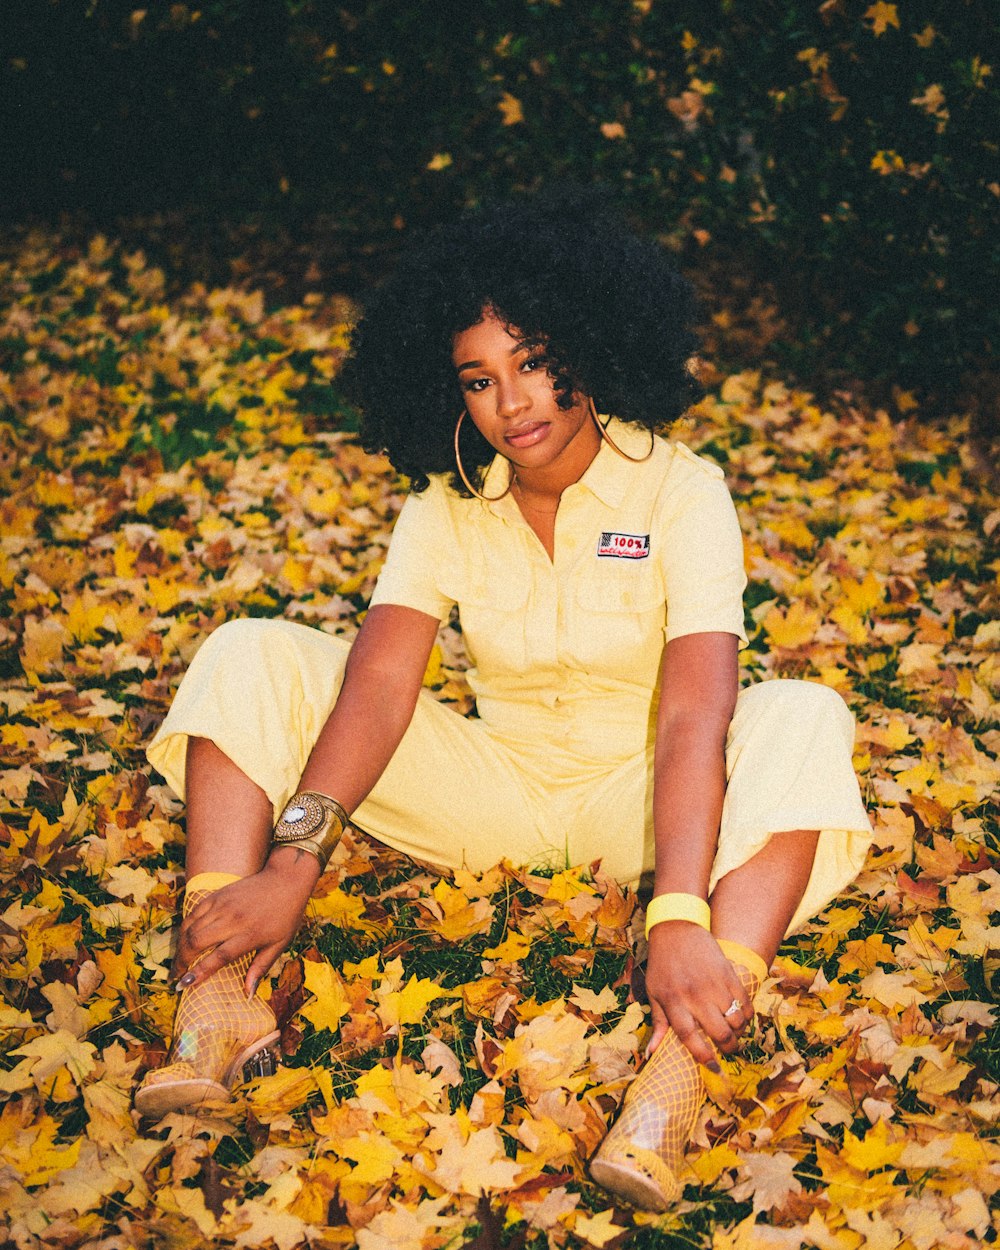 woman in white crew neck t-shirt and yellow shorts sitting on yellow leaves